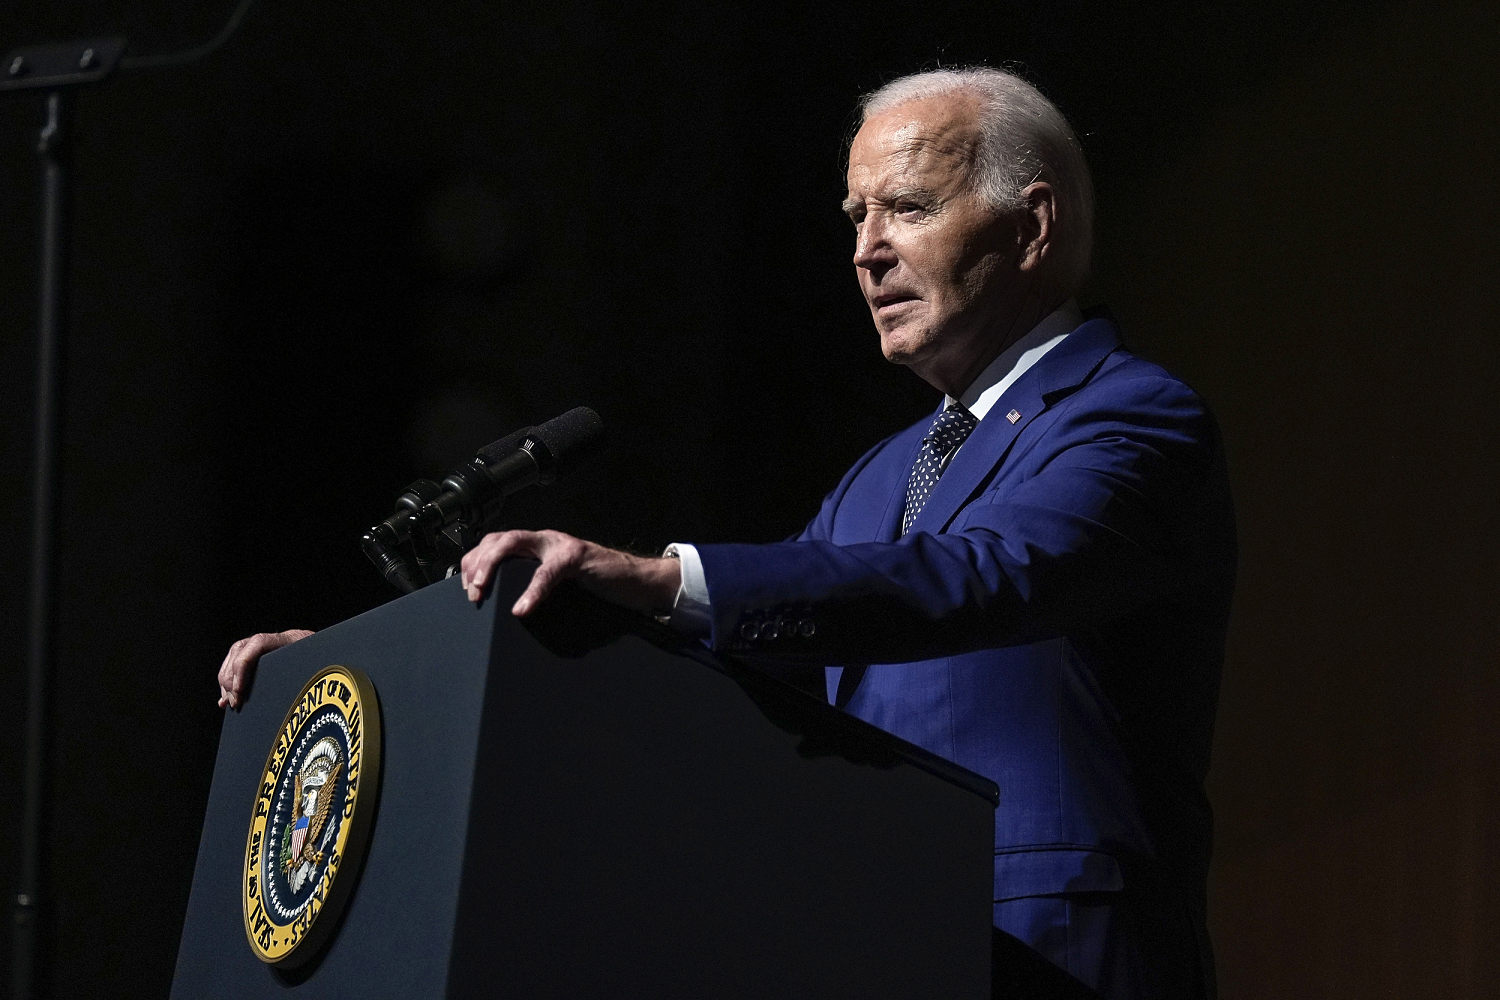 Biden says Supreme Court reforms are needed to counter an 'extreme and unchecked agenda'